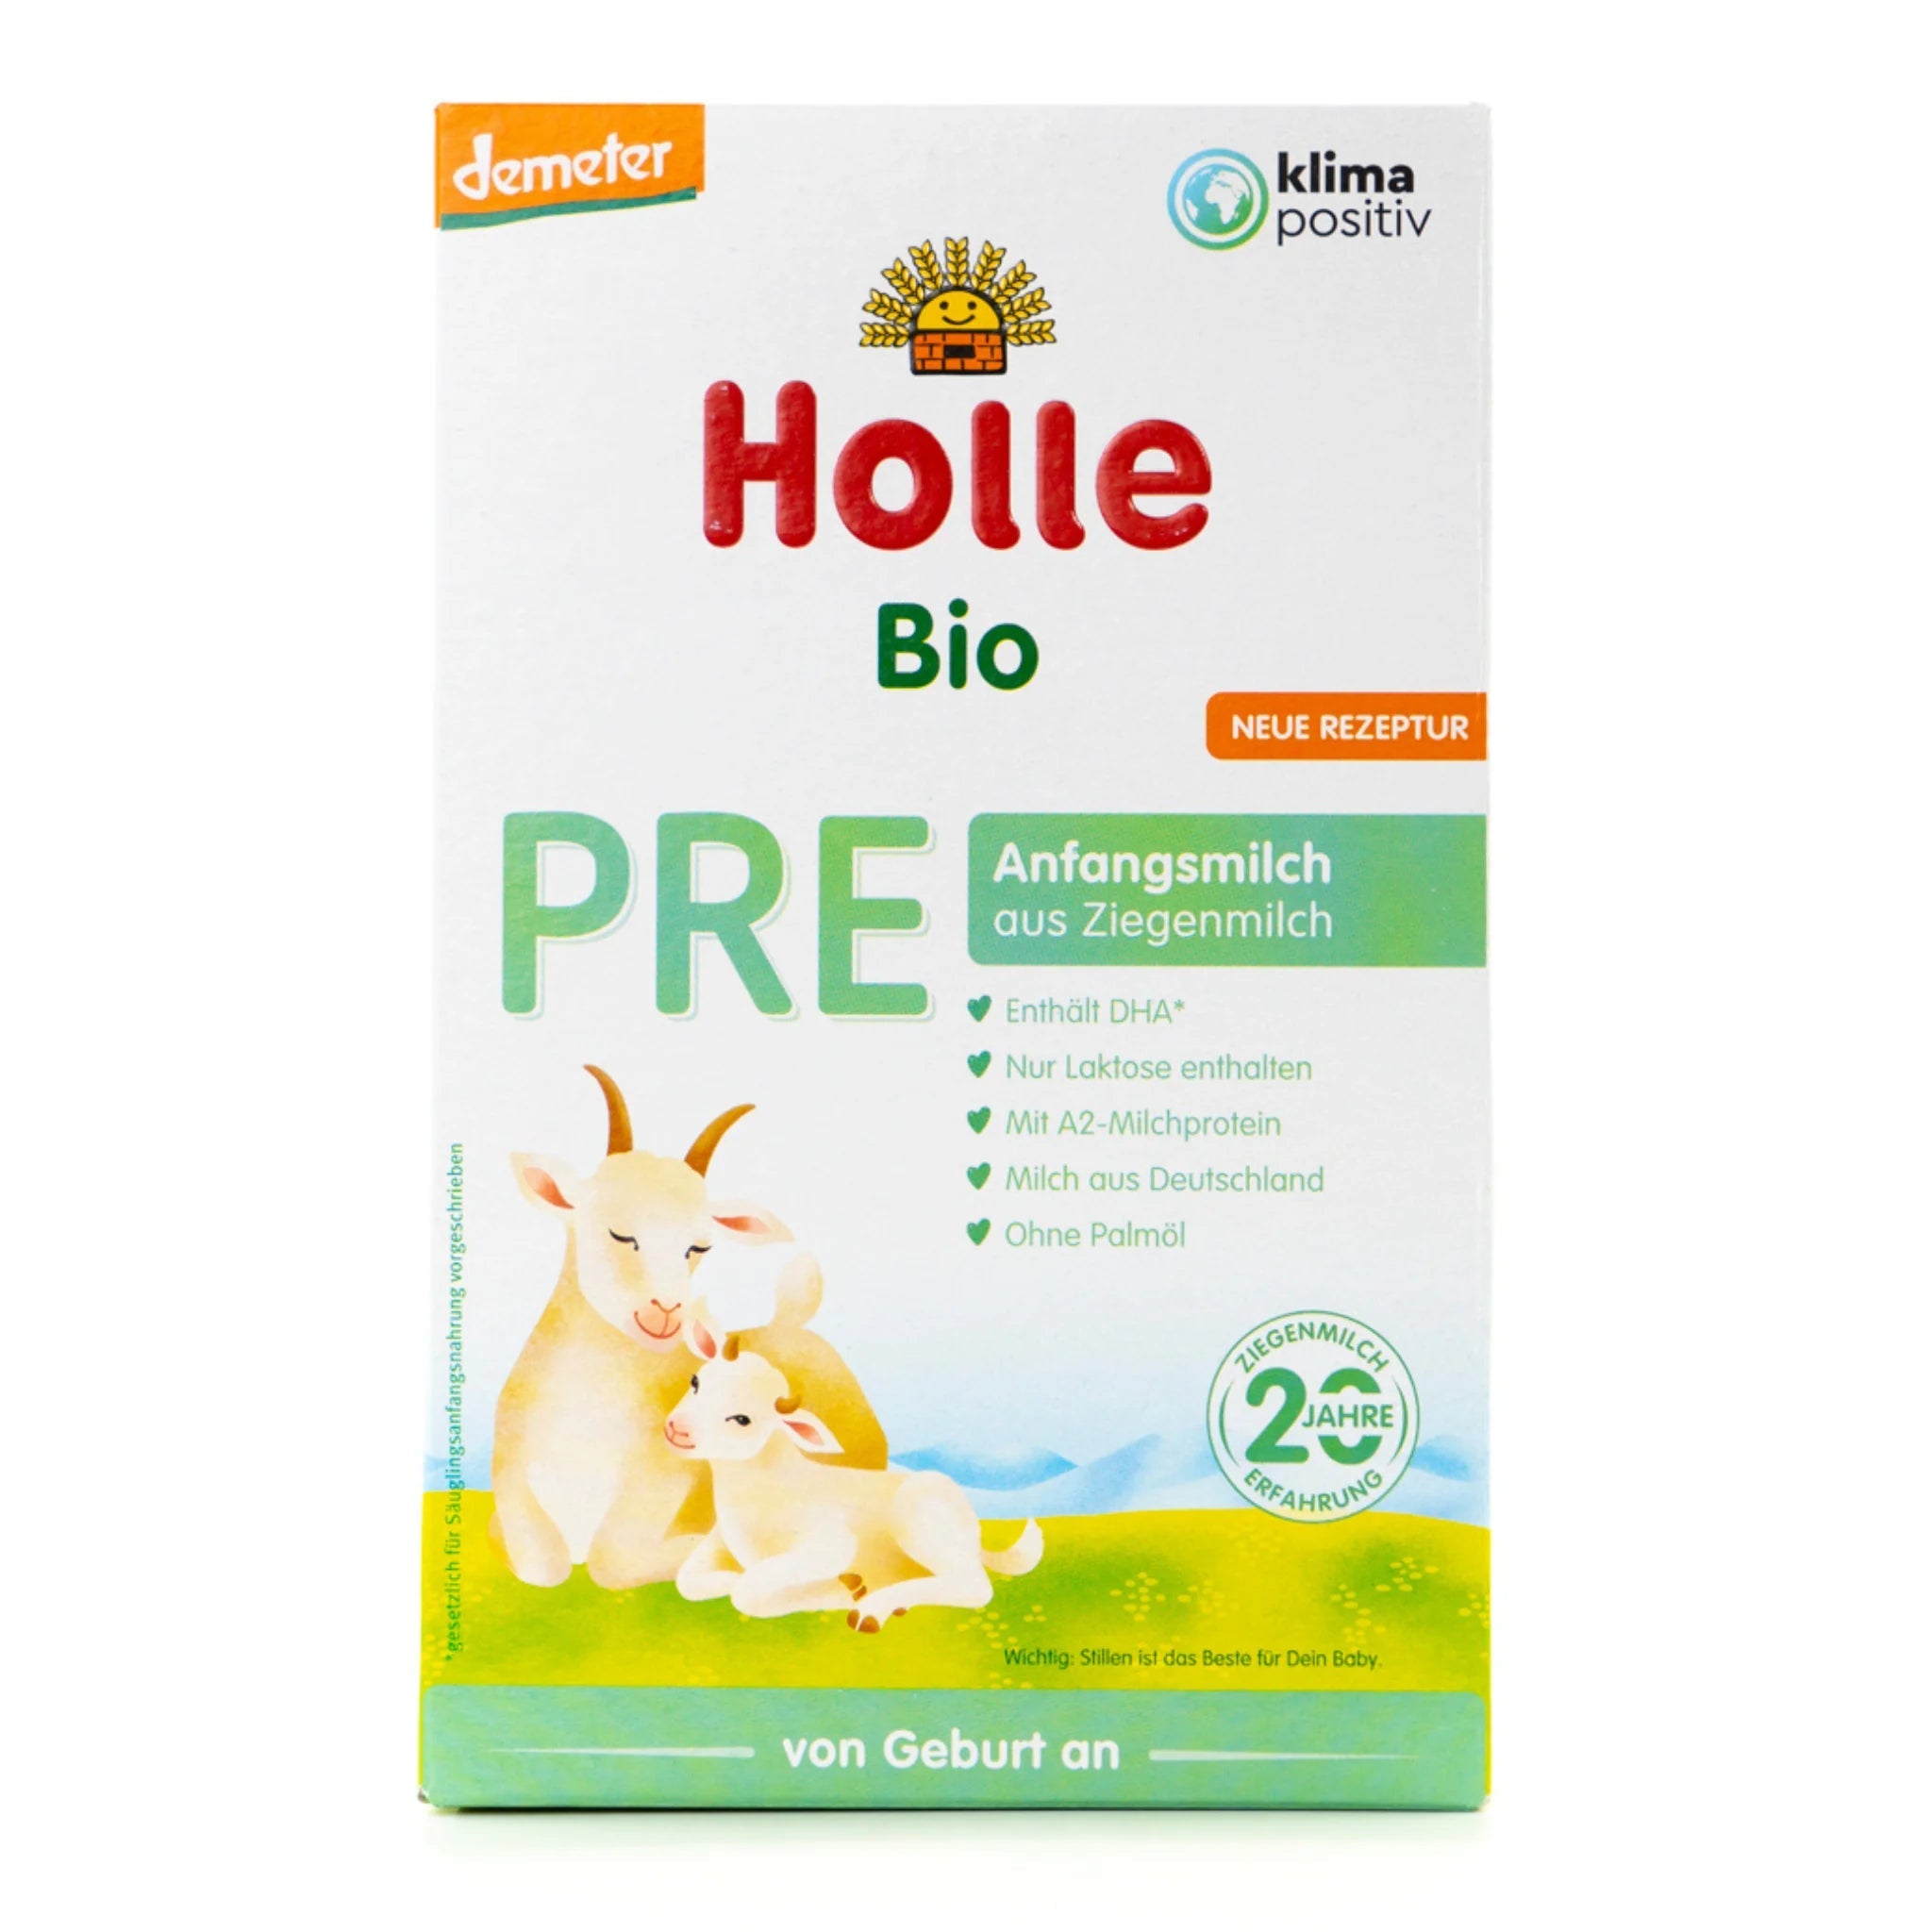 Holle Organic Infant Goat Milk Formula PRE with DHA (6 boxes)